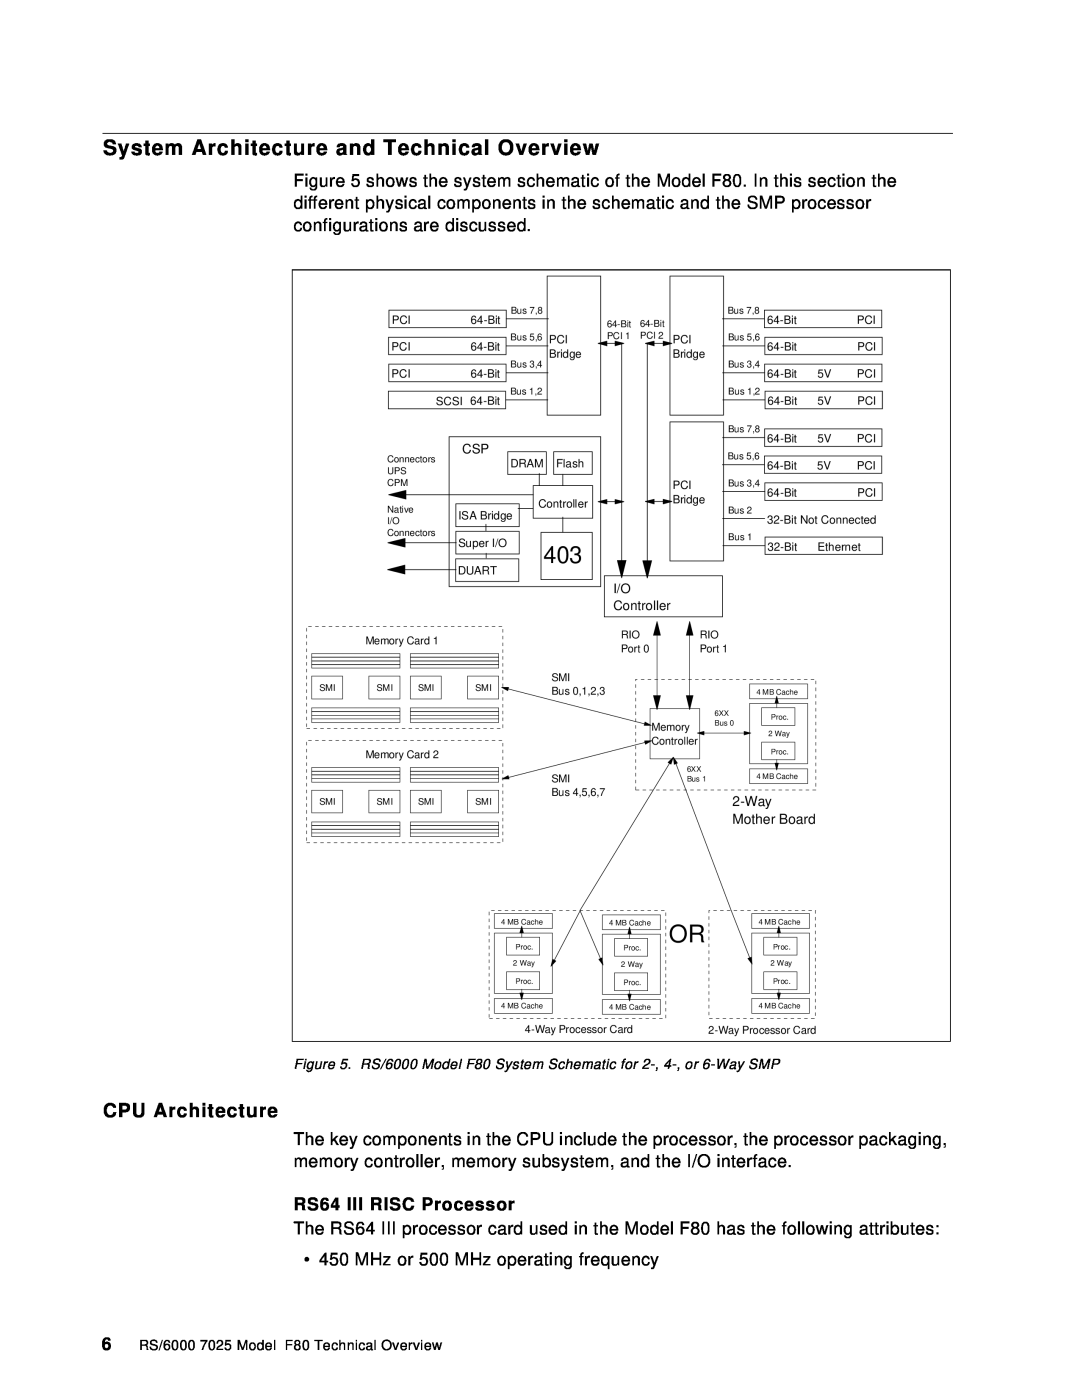 IBM F80 manual System Architecture and Technical Overview, CPU Architecture, RS64 III RISC Processor 